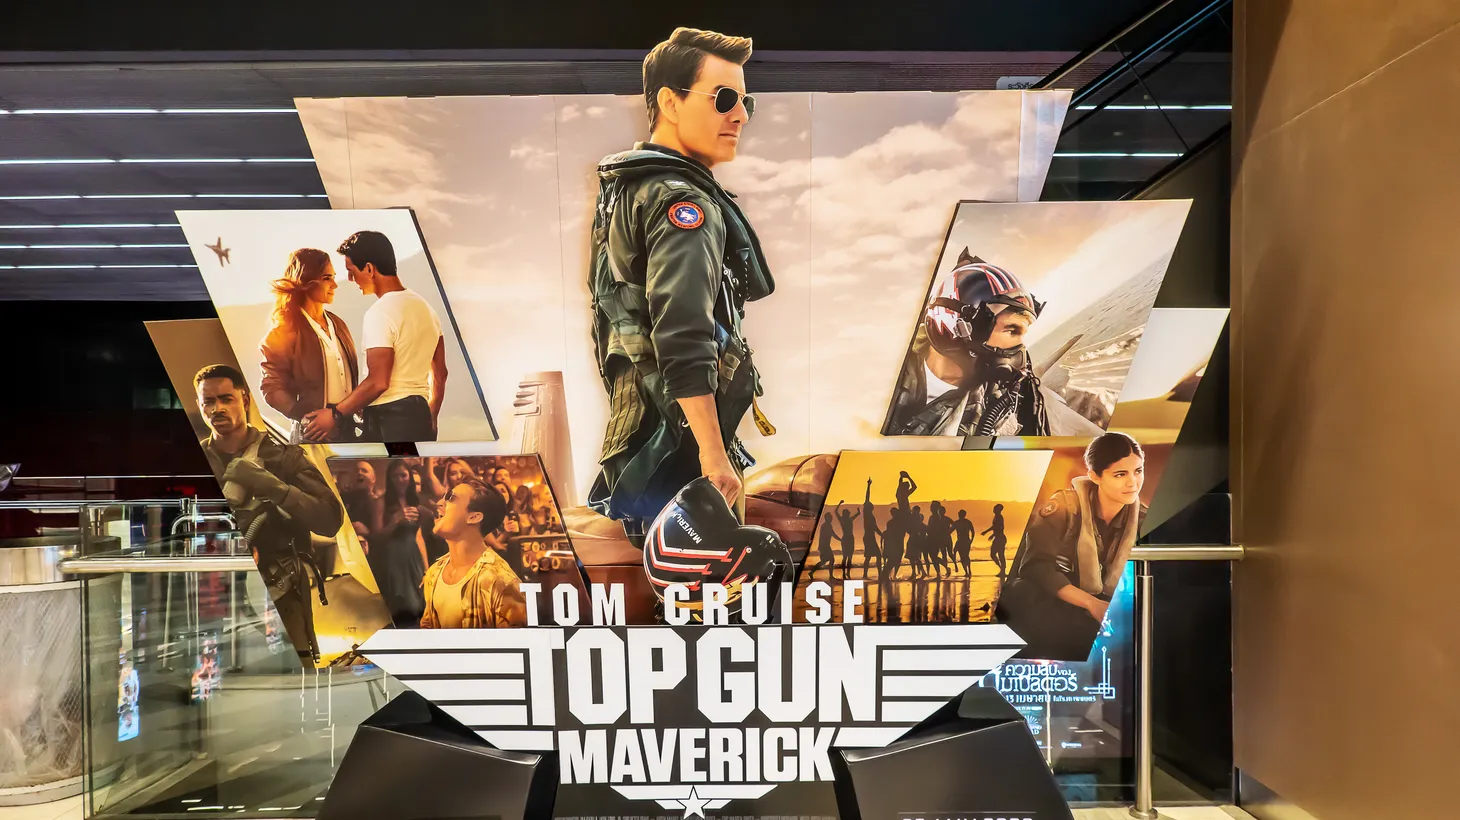 The “Top Gun: Maverick” San Diego premiere was an old Hollywood-style spectacle on May 6, 2022.